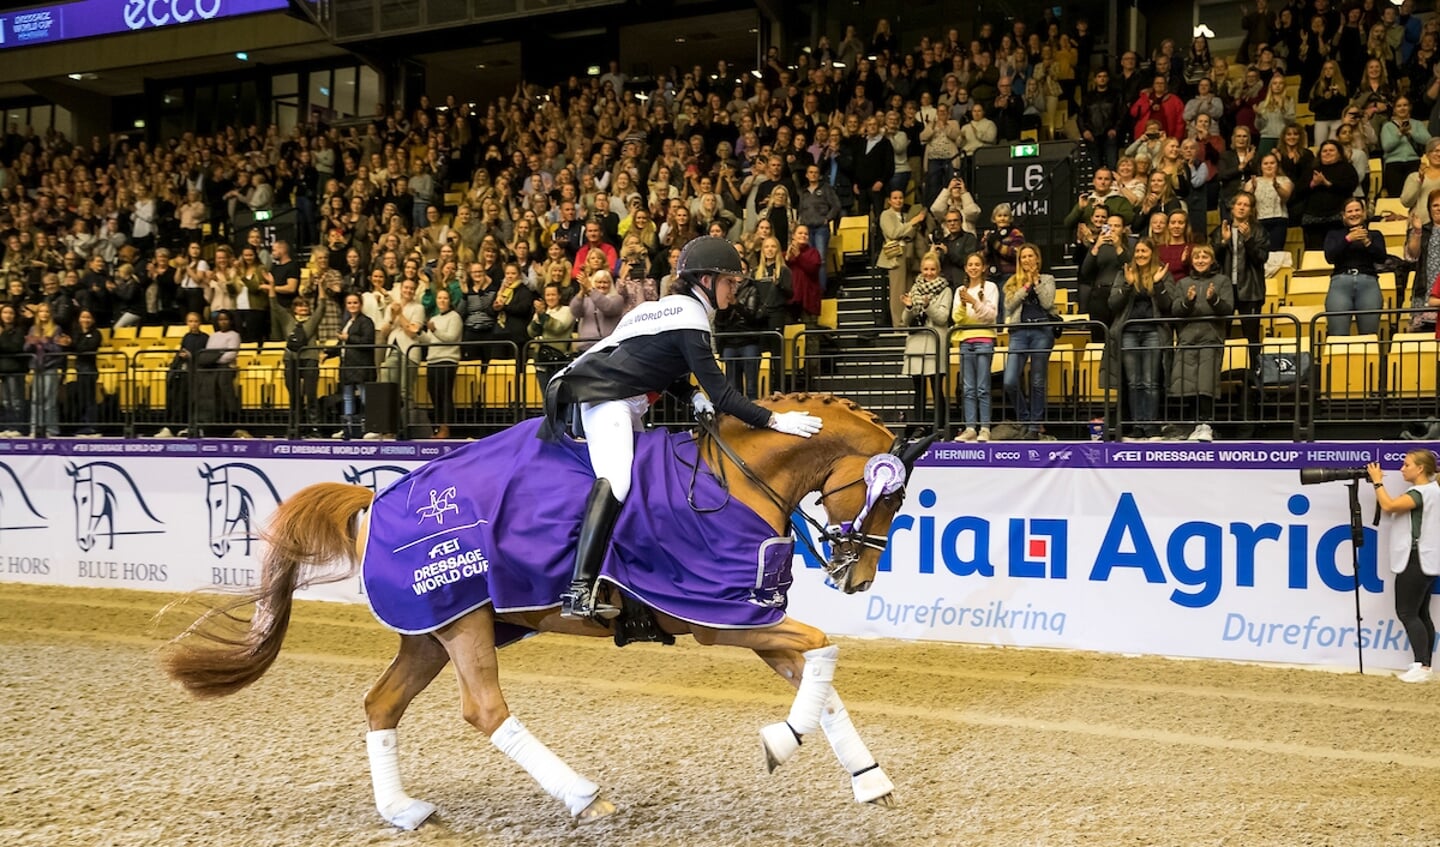 Cathrine Dufour - Atterupgaards Cassidy
FEI World Cup Dressage Herning 2021
© DigiShots